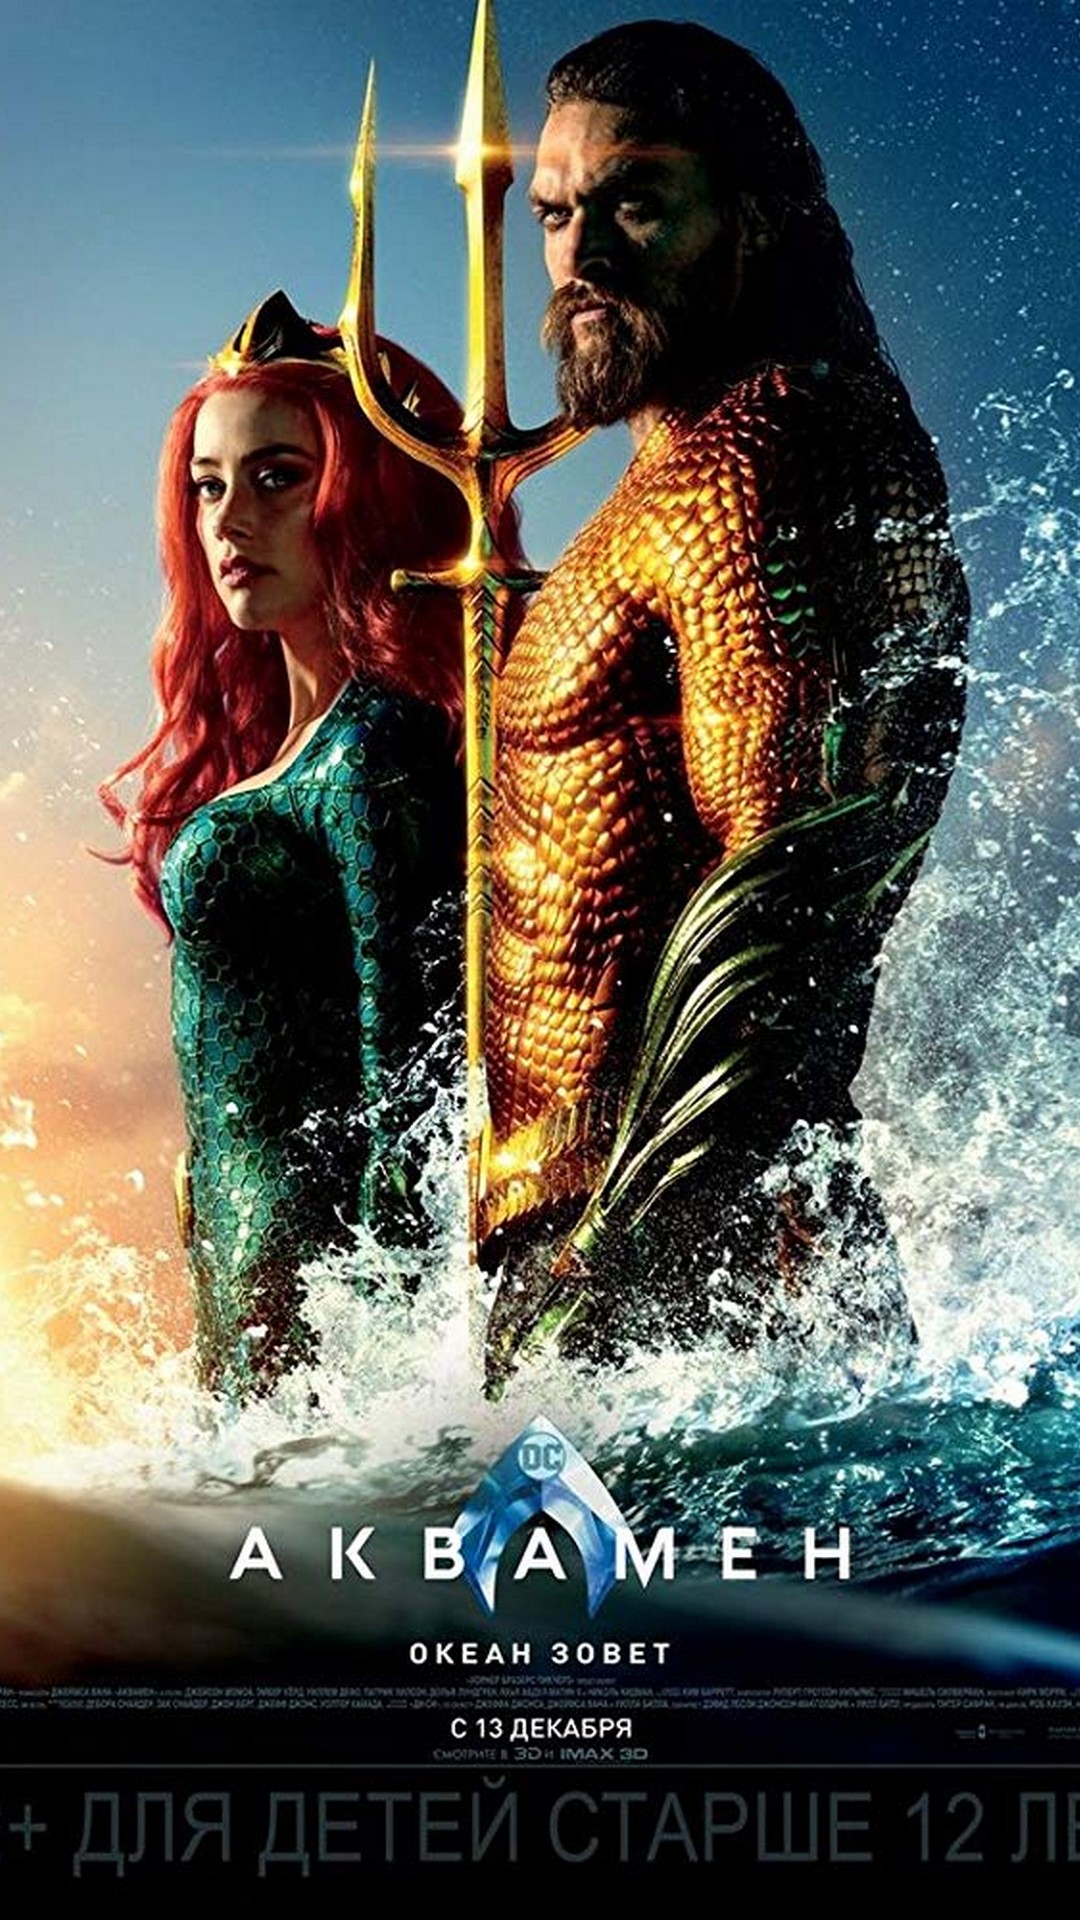 Aquaman 2018 Wallpaper For Phone with image resolution 1080x1920 pixel. You can make this wallpaper for your Desktop Computer Backgrounds, Mac Wallpapers, Android Lock screen or iPhone Screensavers